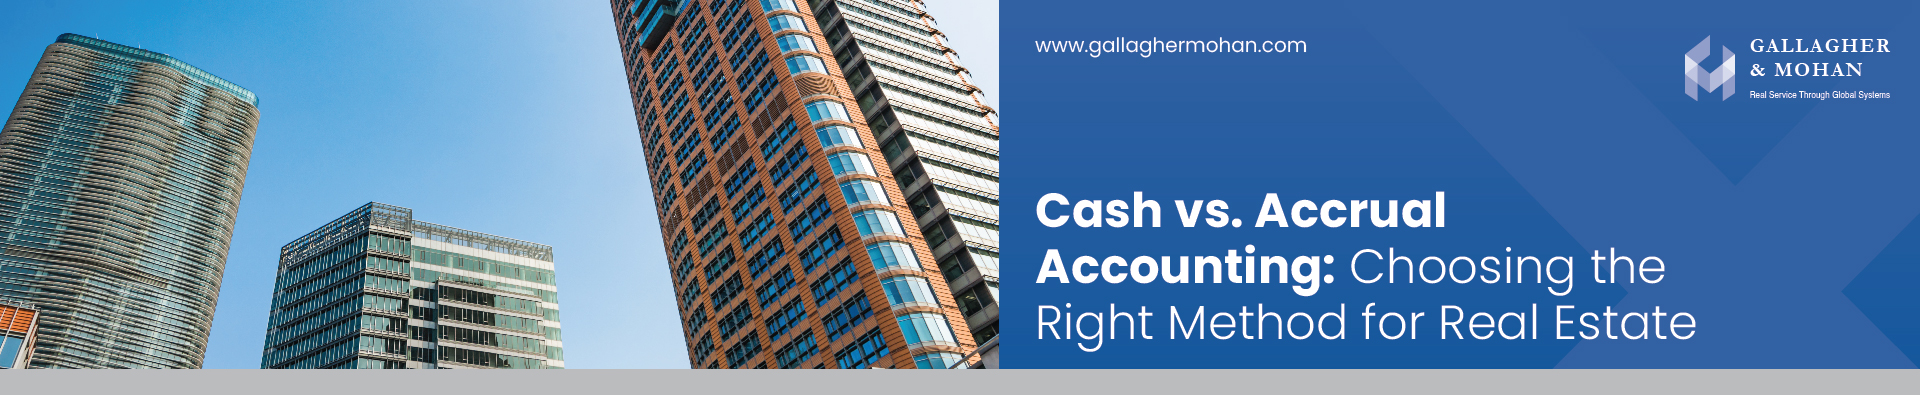 Cash Vs Accrual Accounting Choosing The Right Method For Real Estate